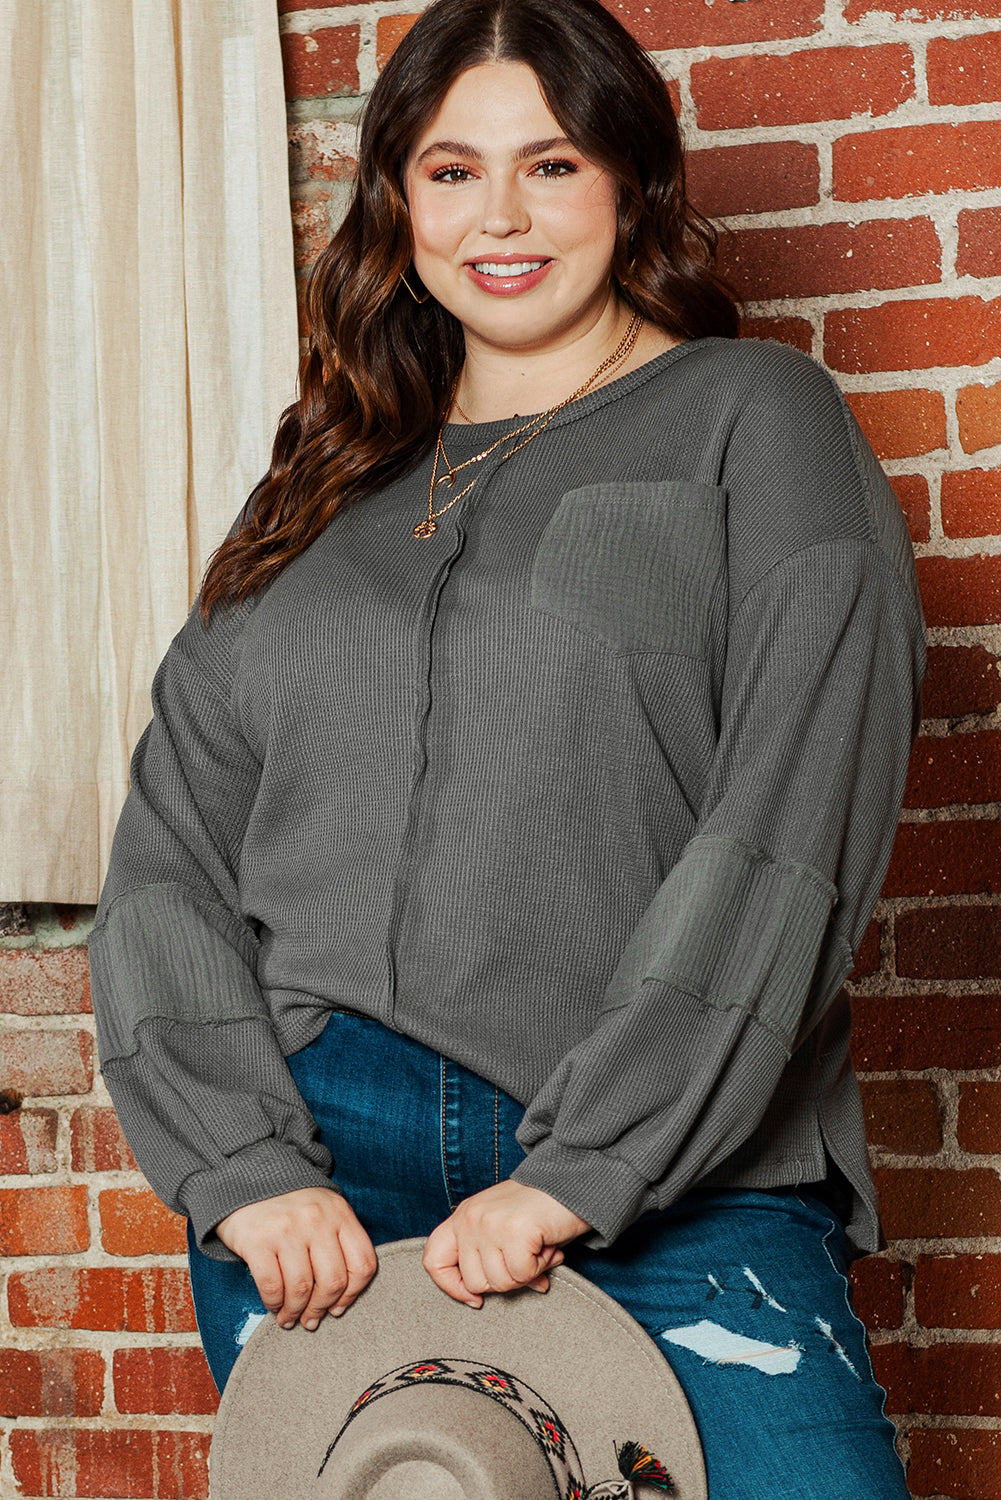 Pink Plus Size Exposed Seam Crinkle Patchwork Top